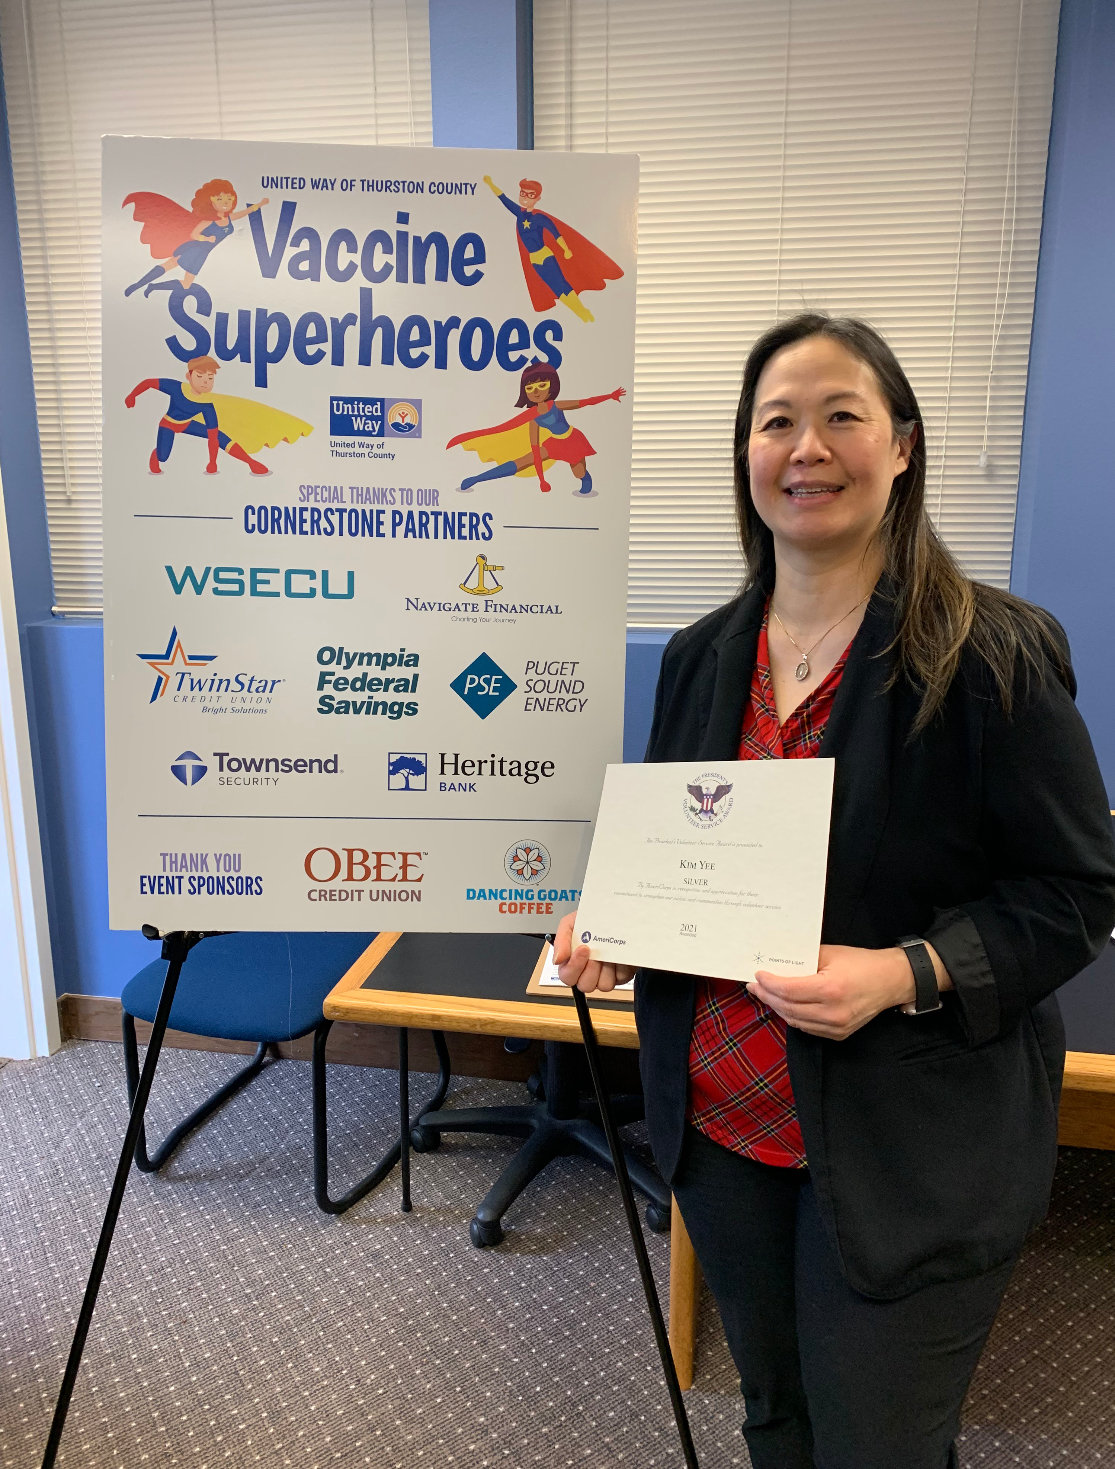 President’s Volunteer Service Awardee Kim Yee served for 473 hours volunteering for Thurston County’s vaccination drive last year.